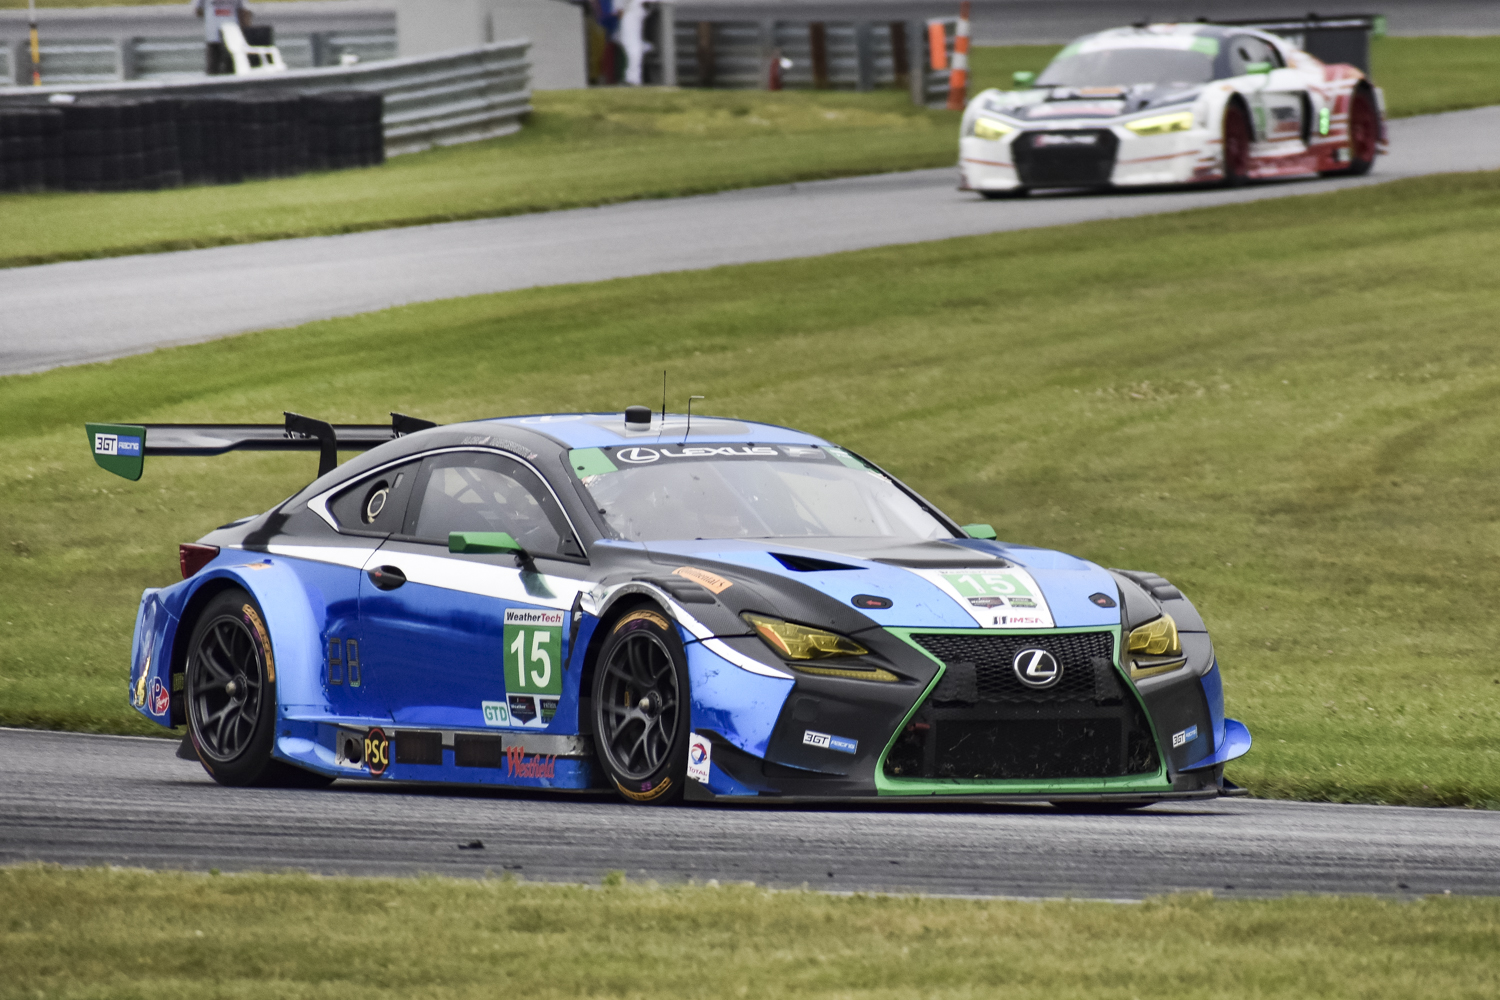 Side shot of the Lexus RC F GT3 on the track with another car in the background